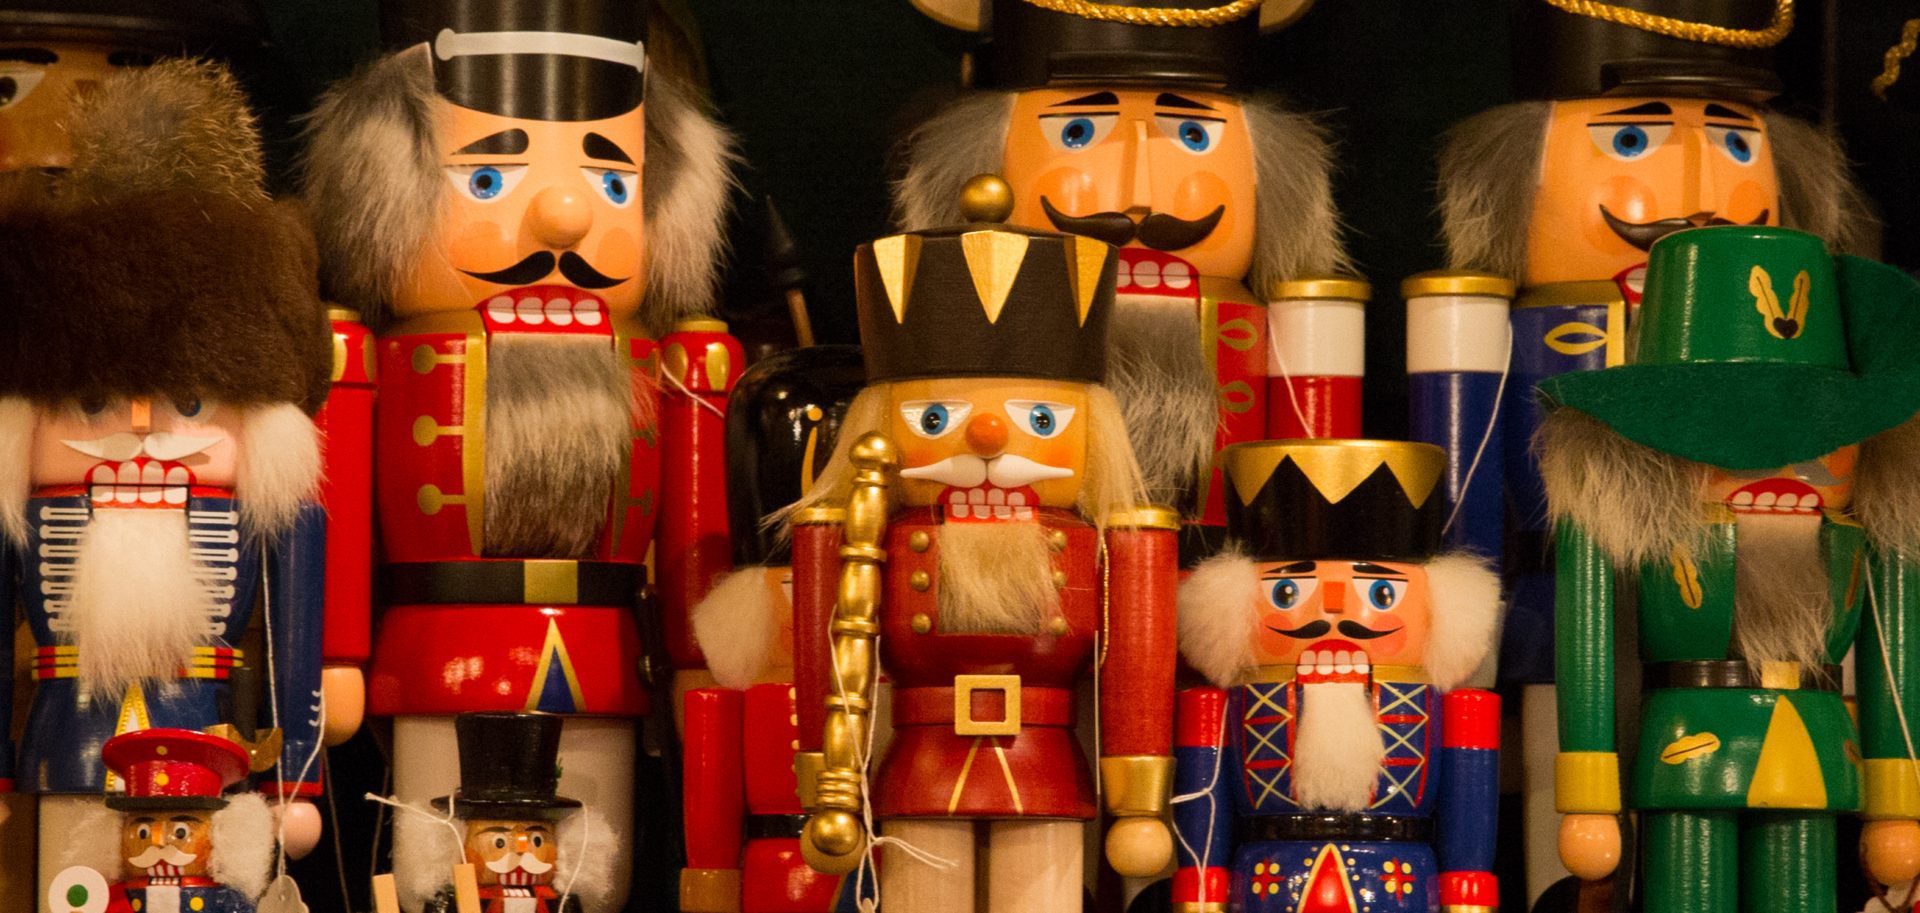 An image of handcrafted christmas nutcrackers